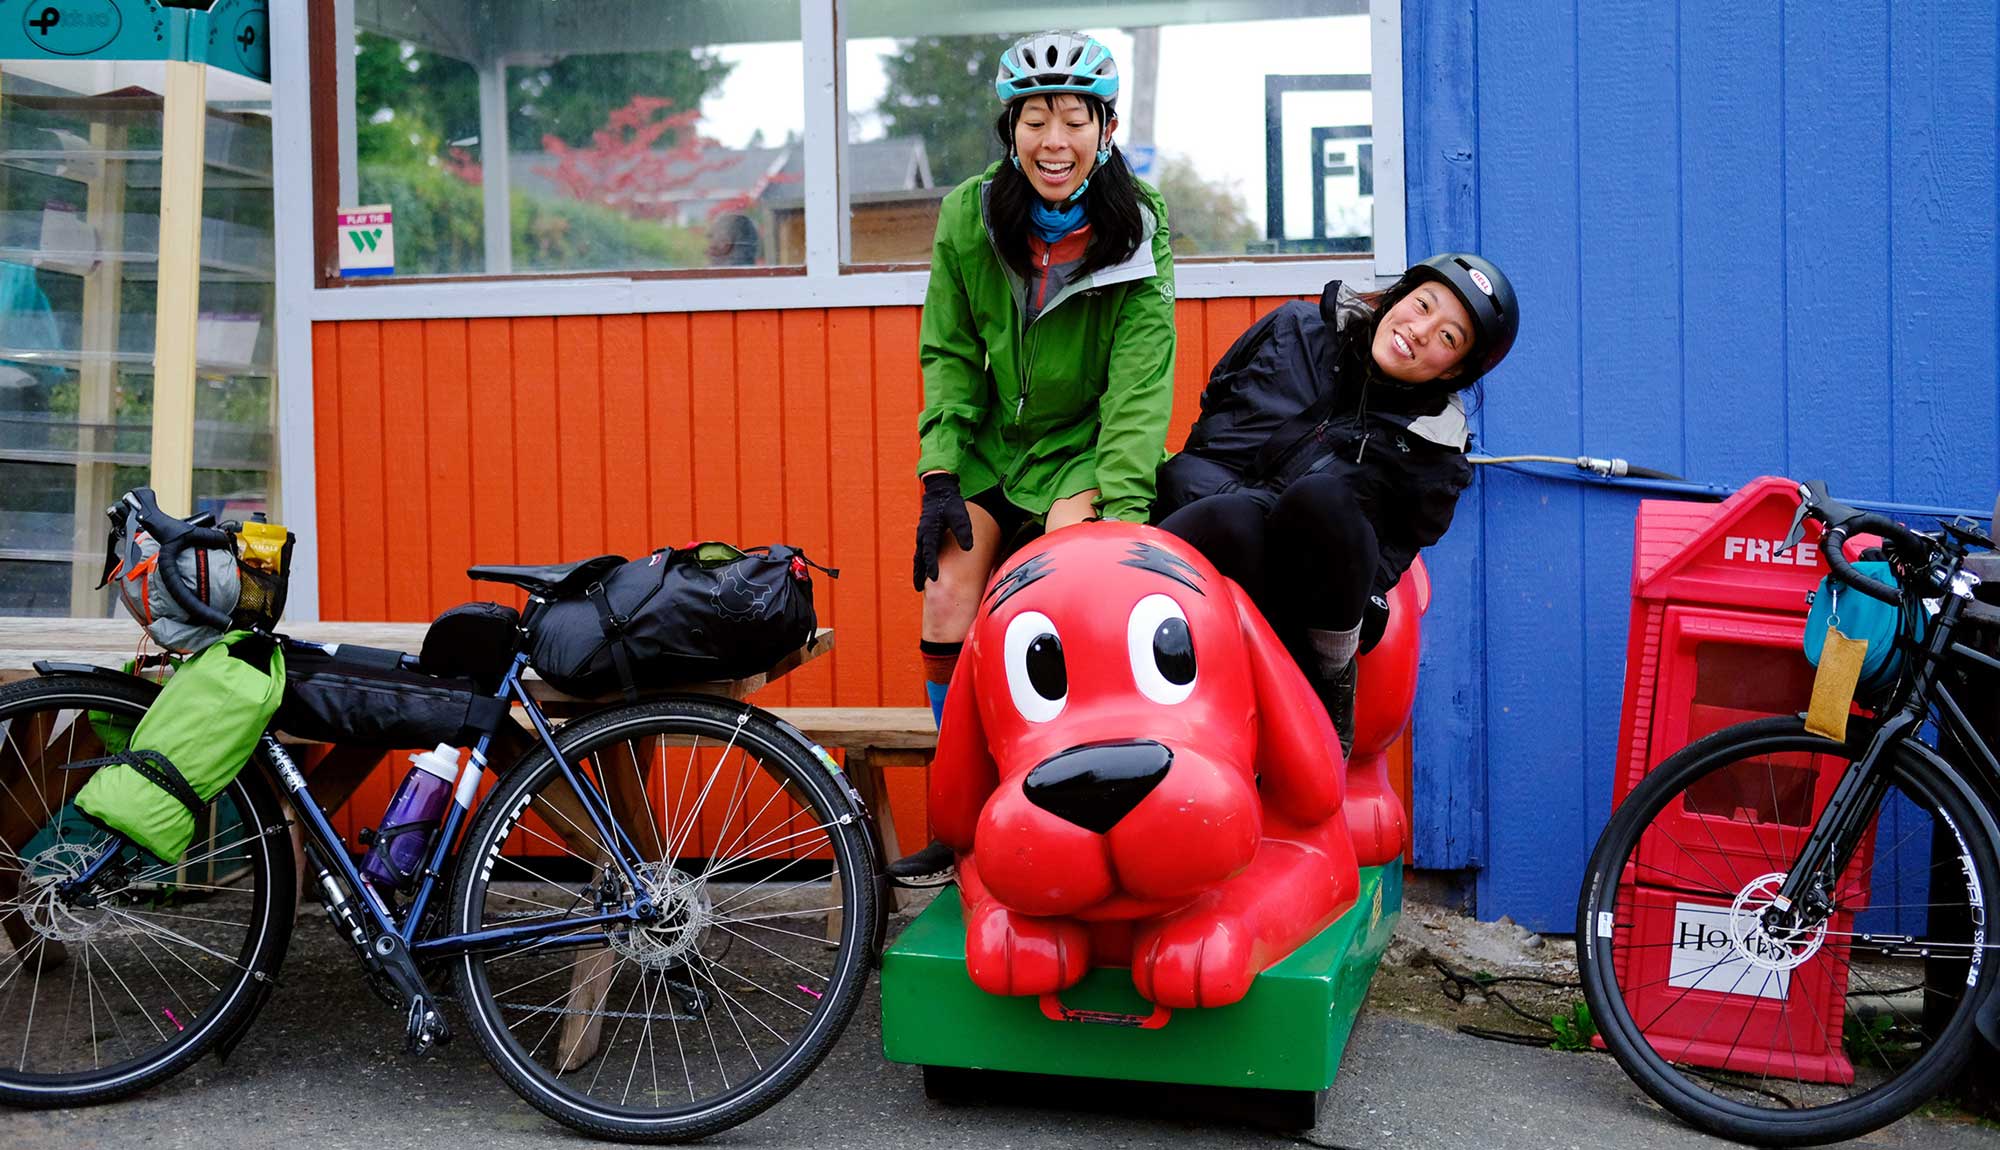 Two people in bike helmets grinning and riding a Clifford the Big Red Dog child's ride.